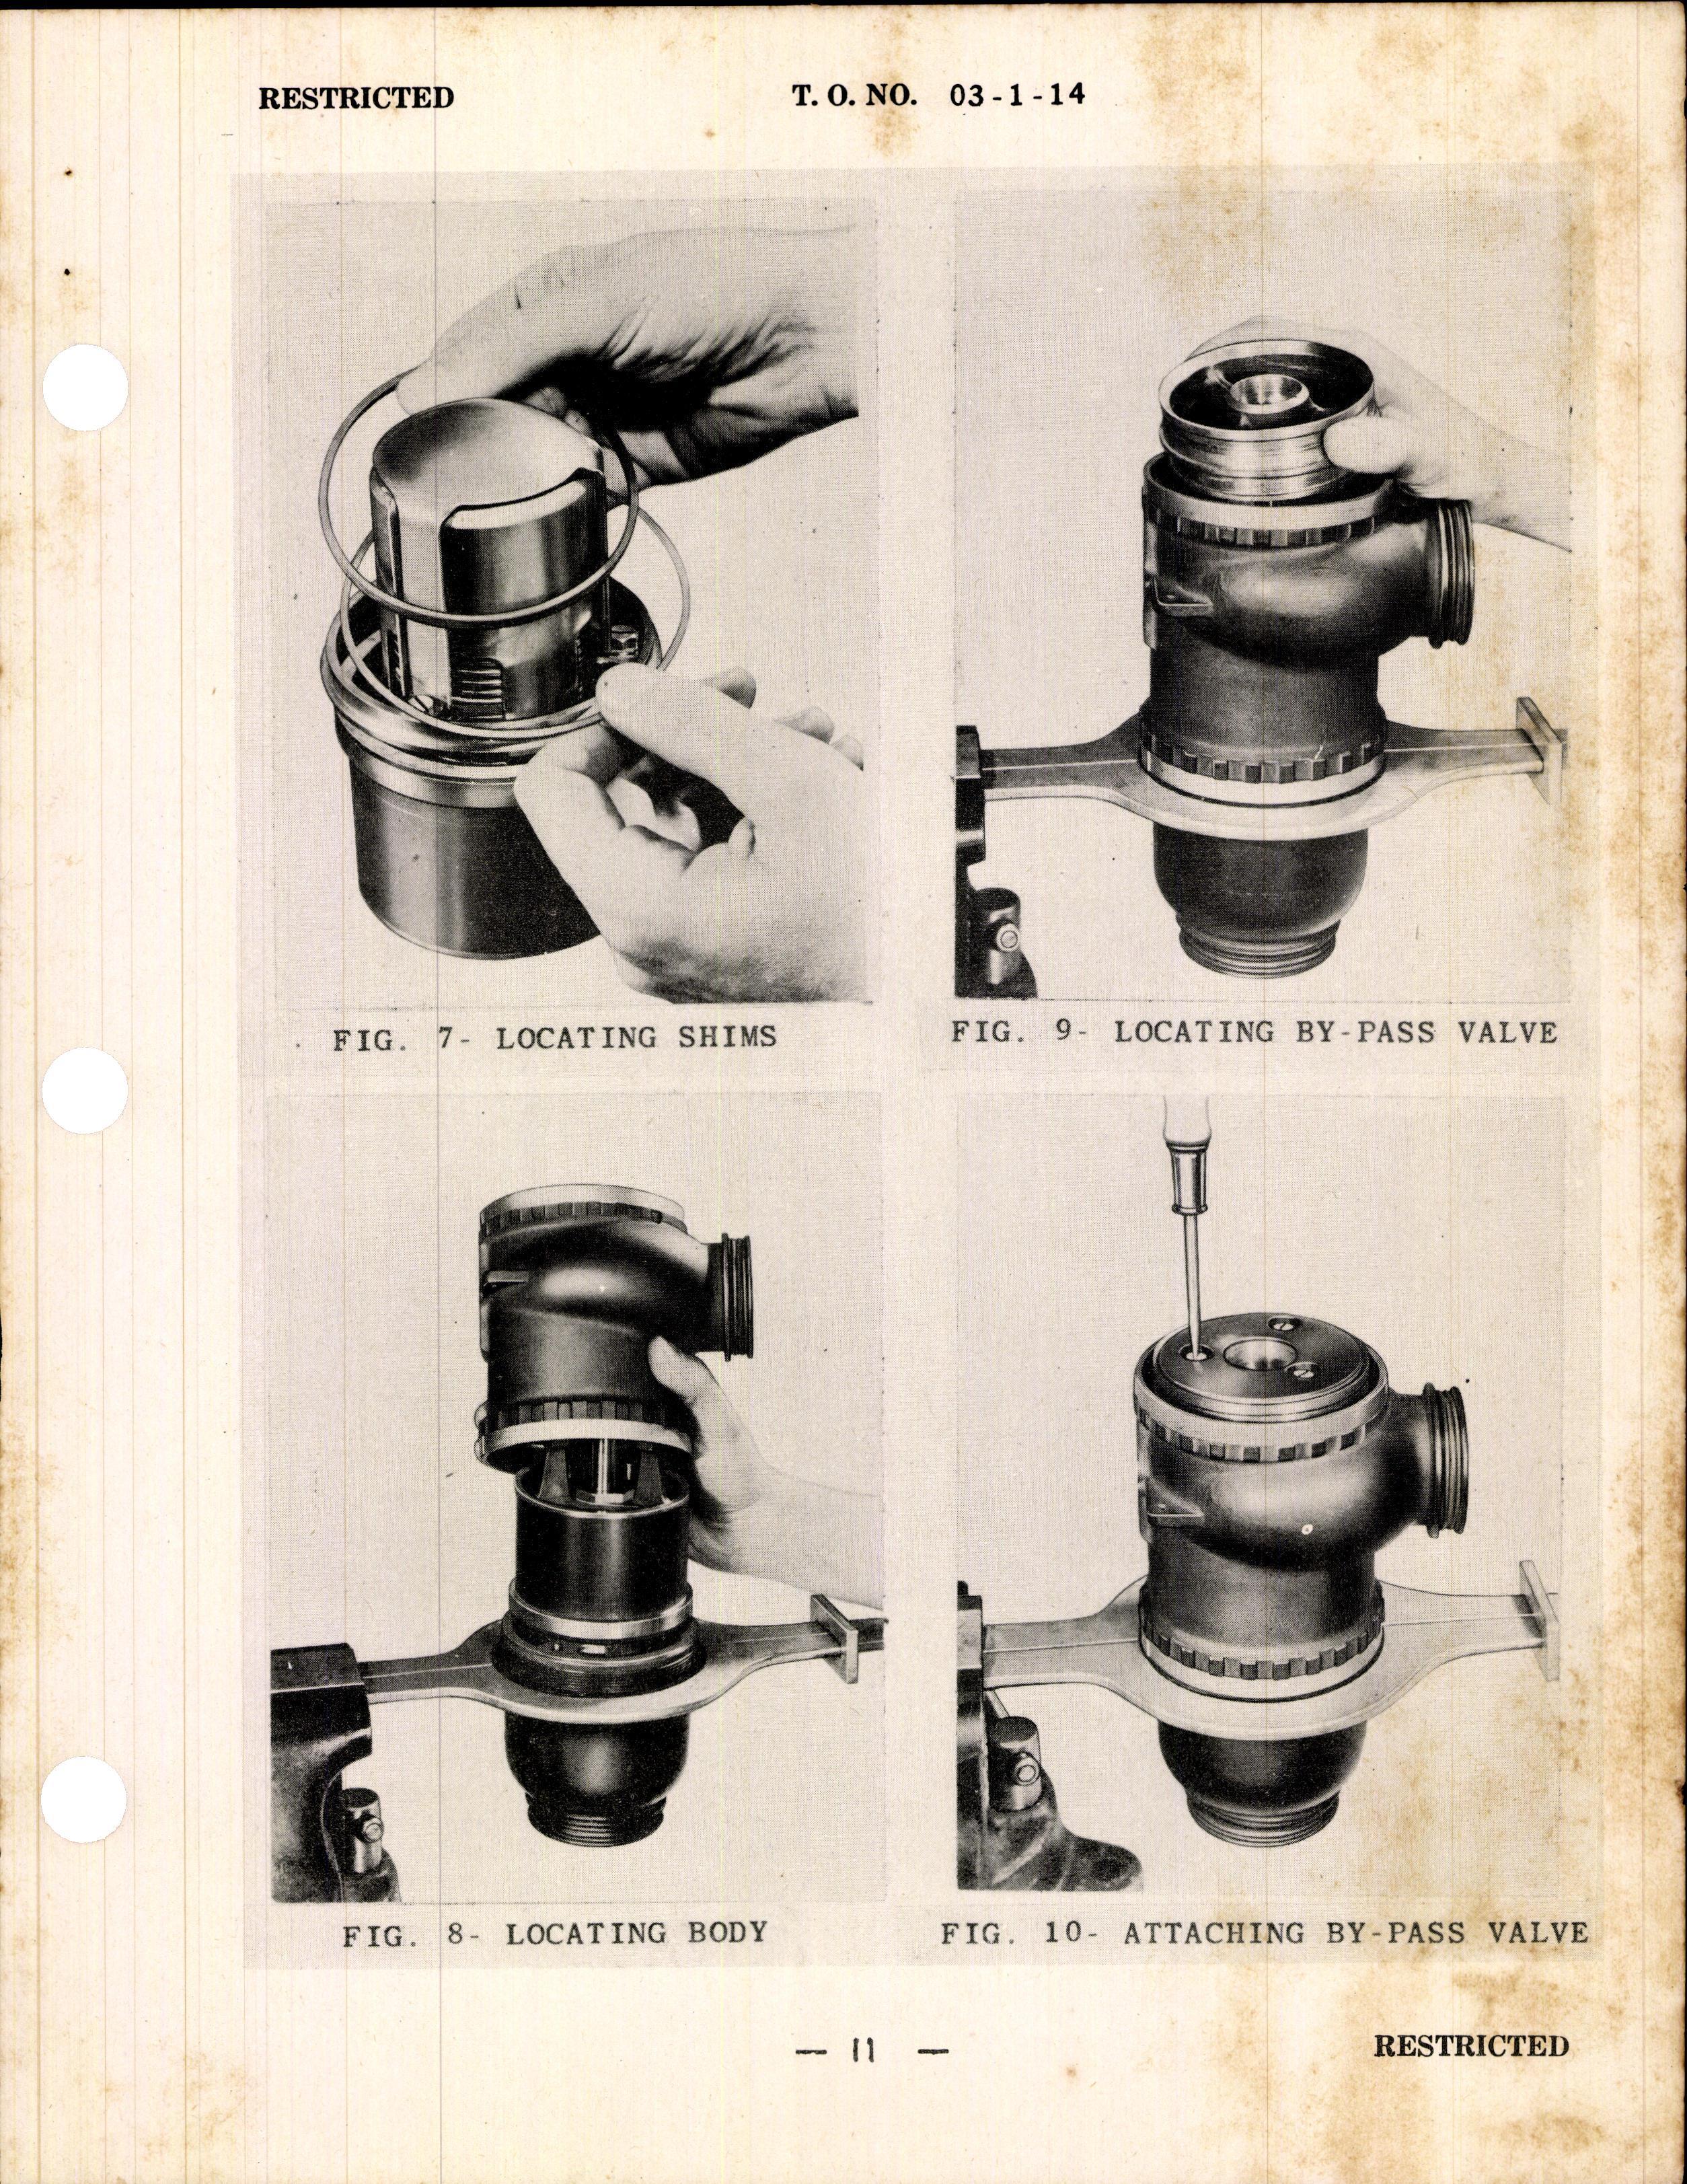 Sample page 13 from AirCorps Library document: Handbook of Instructions with Parts Catalog for the Pressure Coolant Thermostat